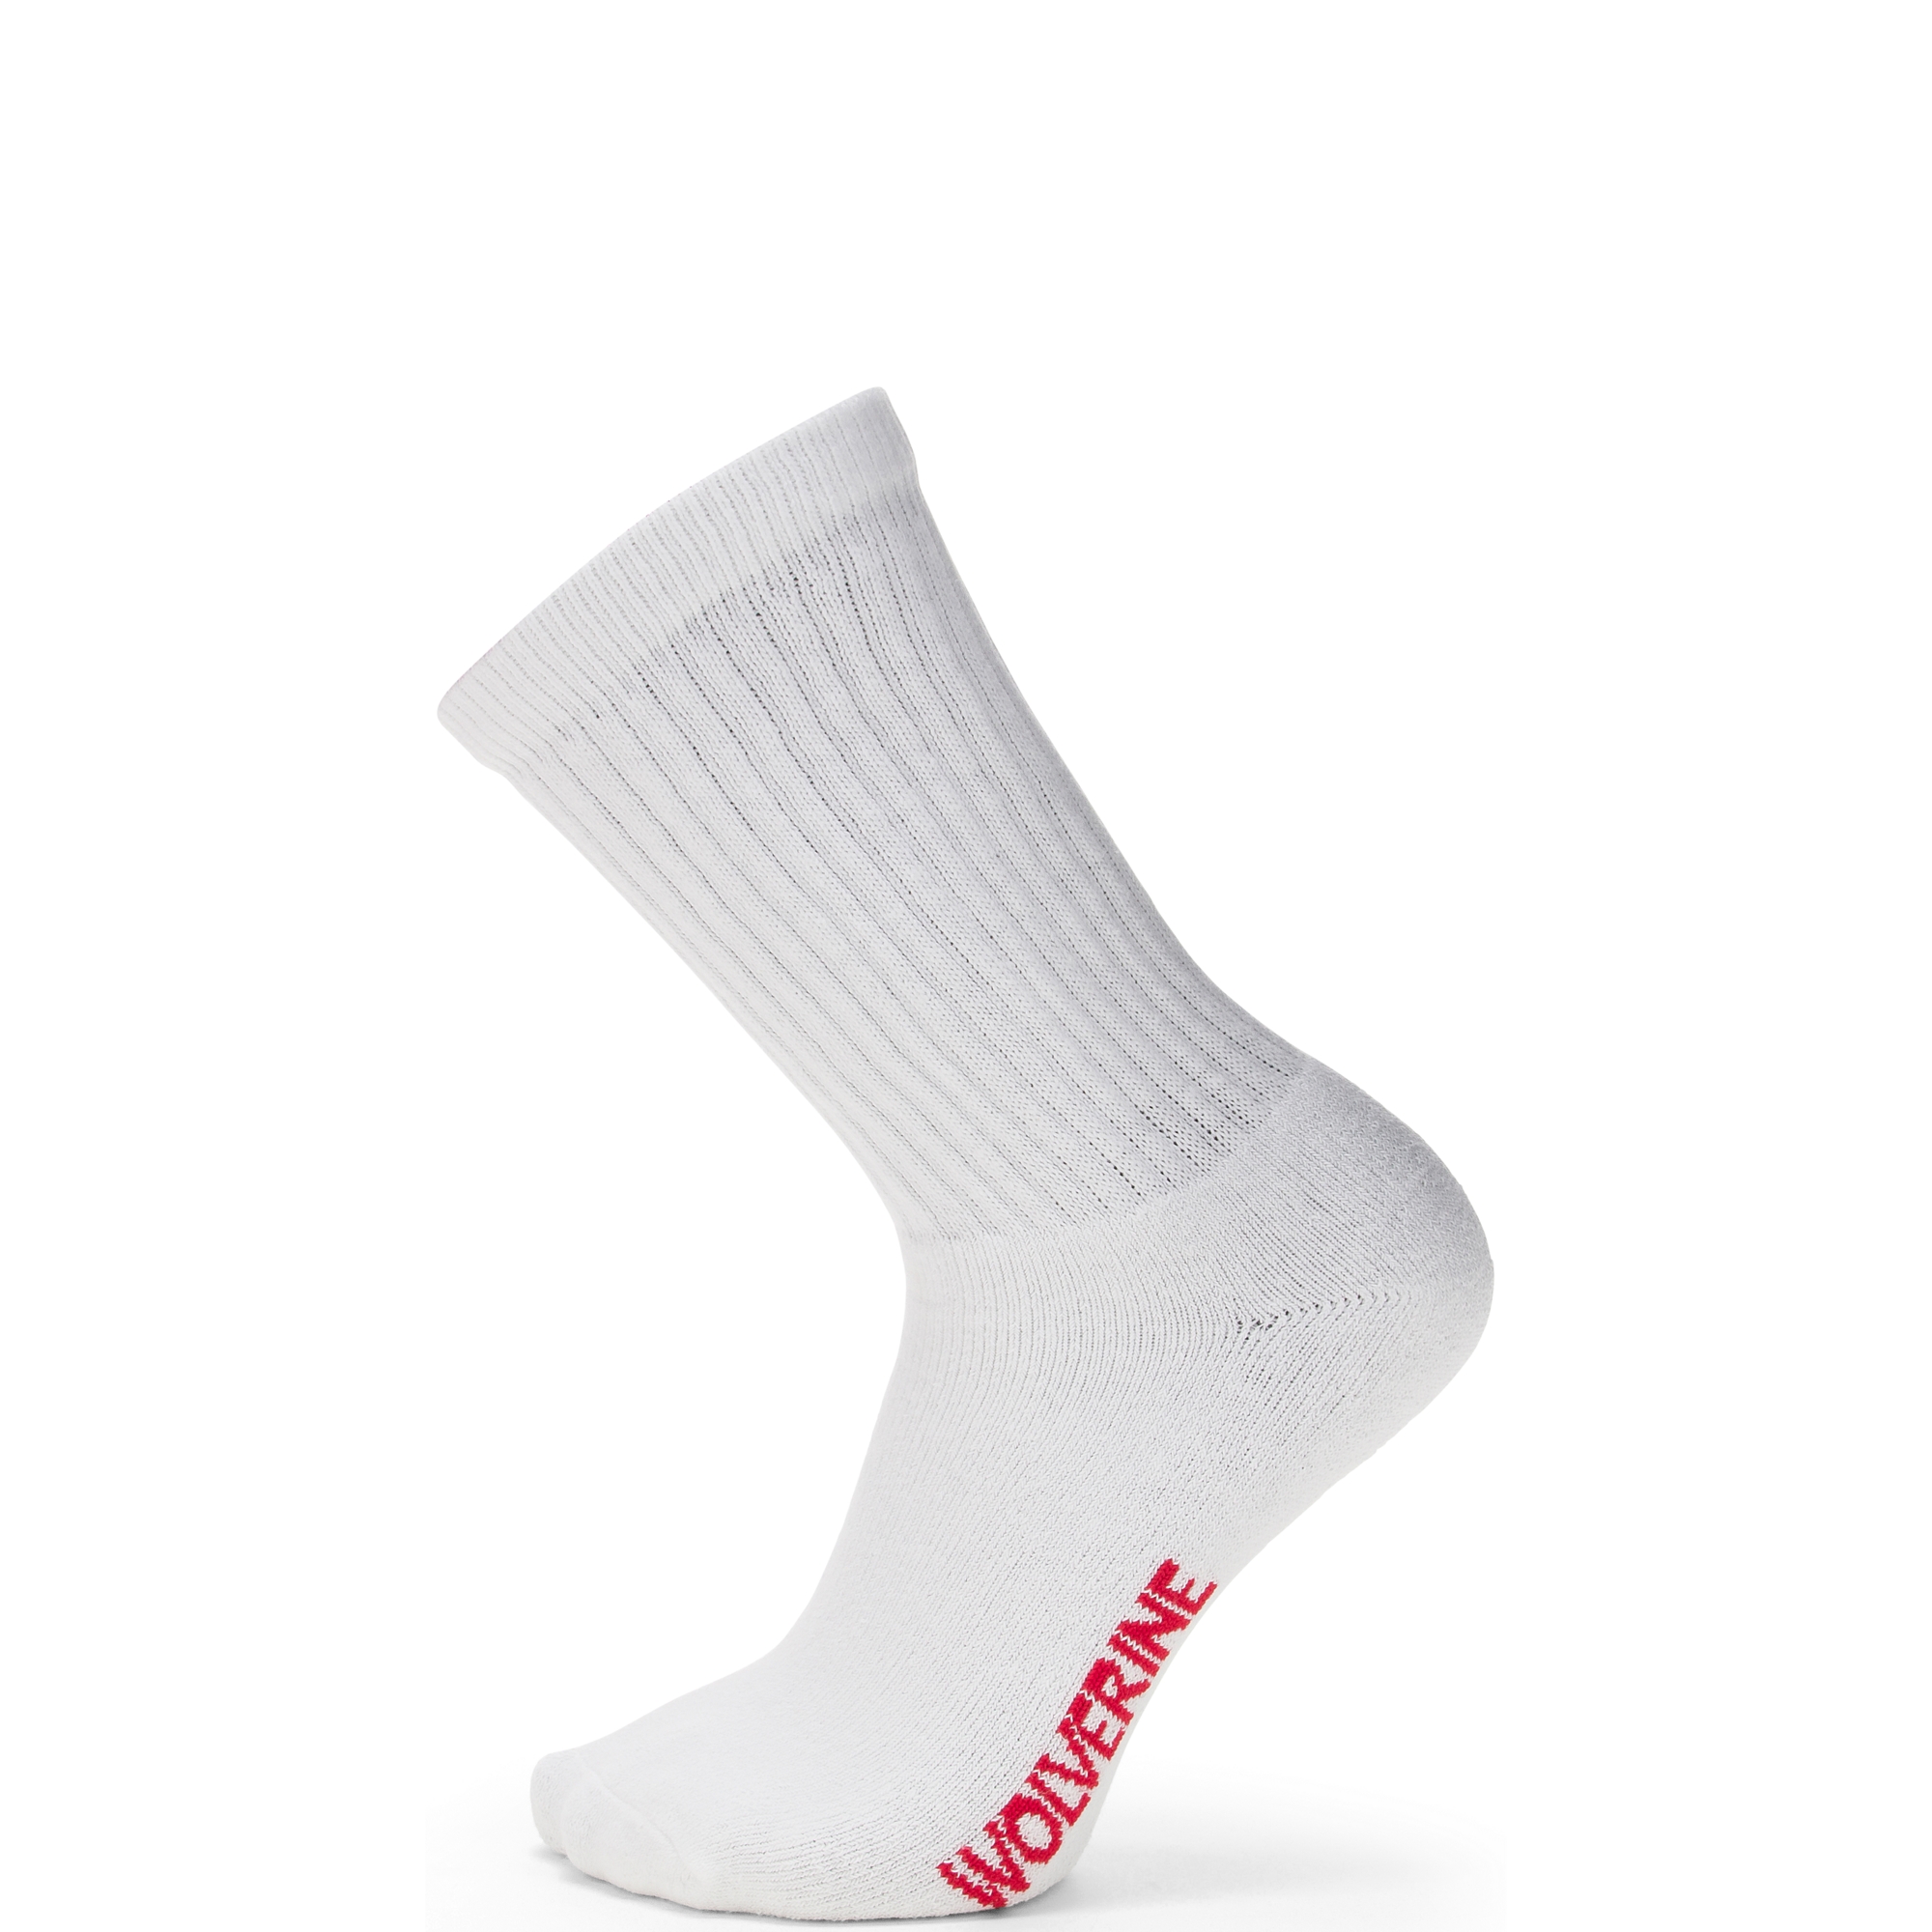 Large Wolverine Cotton Over-the-Calf Socks 4 pair only $21.99 White or Black 